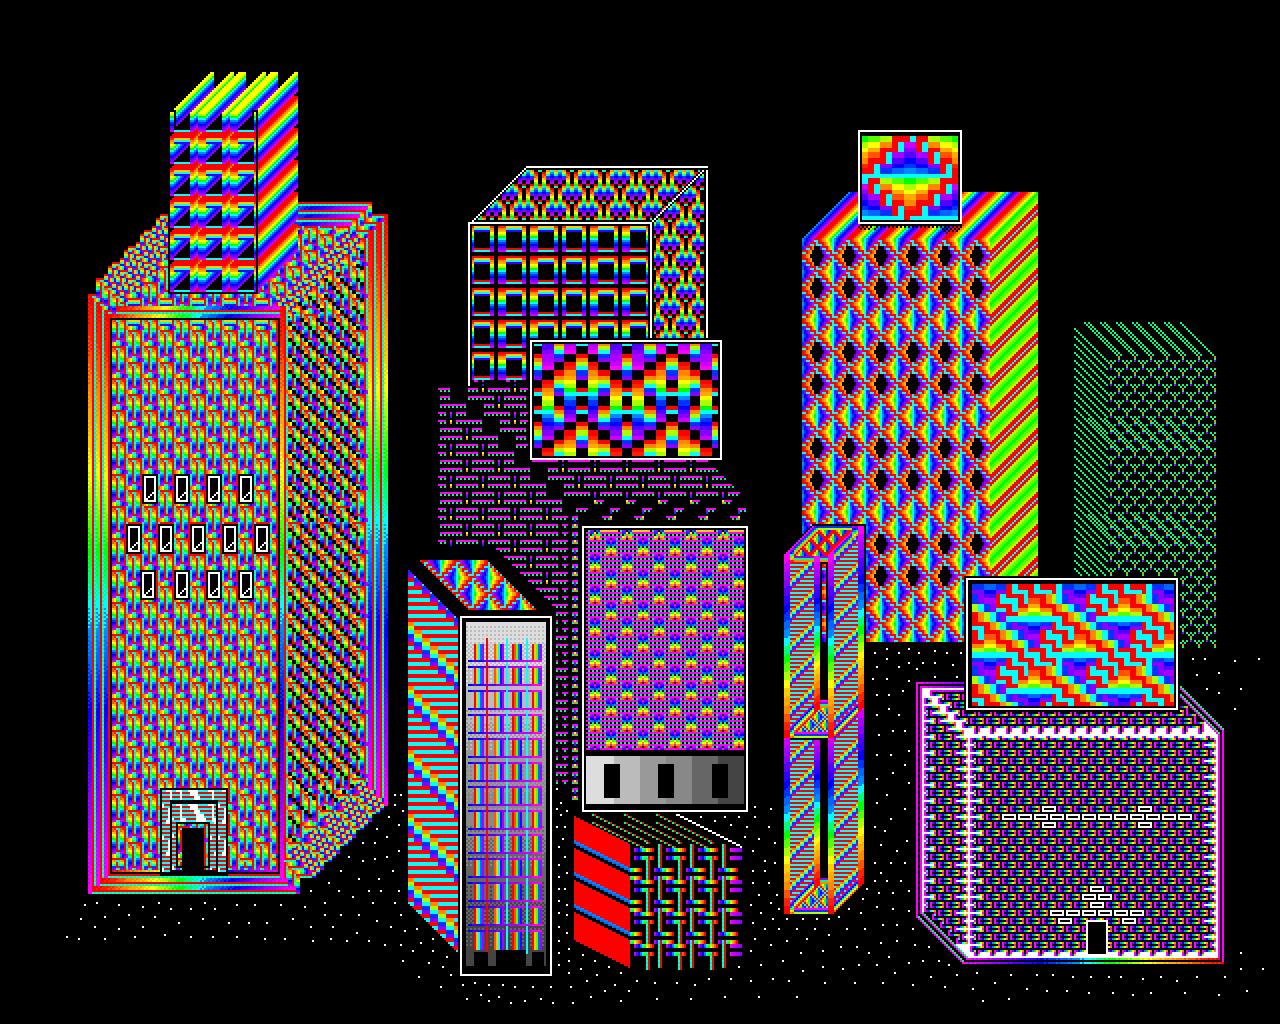 A composition of several boxy buildings constructed from patterns of rainbow-colored pixels against a black backgroundp